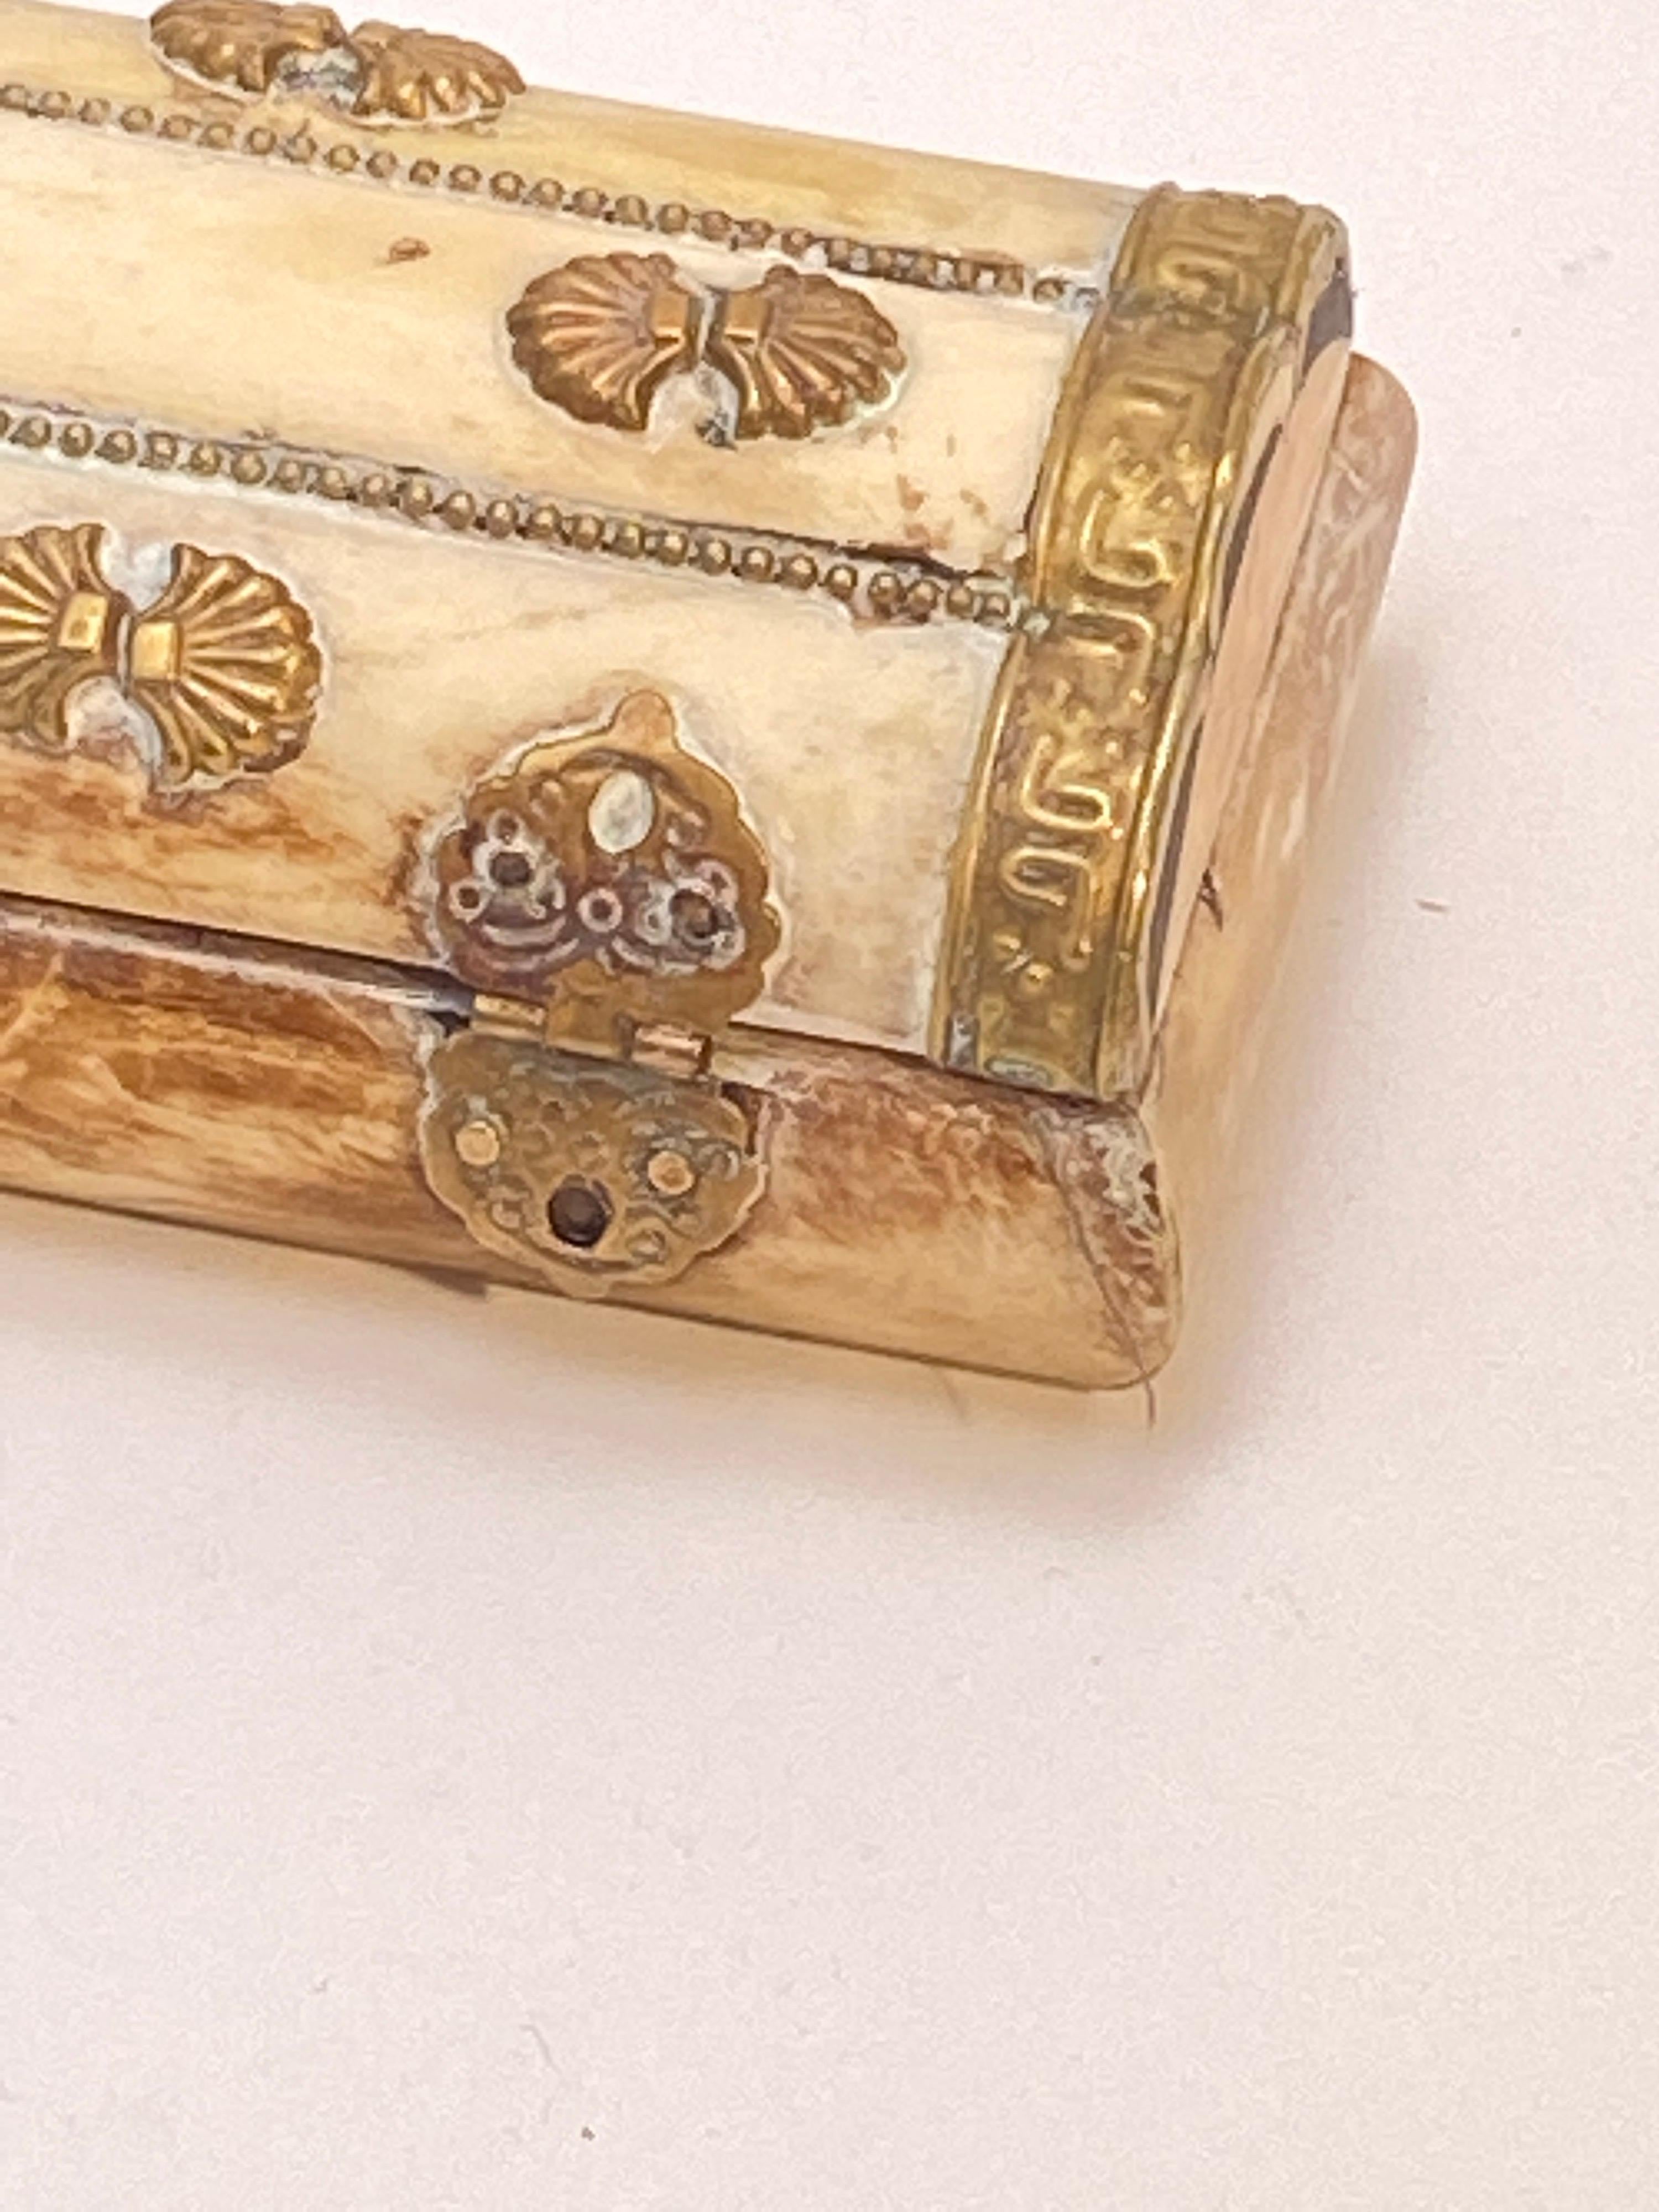 This box is a vintage Indian camel bone jewelry box.
Rectangular shape with hand hammered brass details. Cover has pierced leaf pattern details and brass beads inset in between the bones. Vintage jewelry box lined with felt.
      